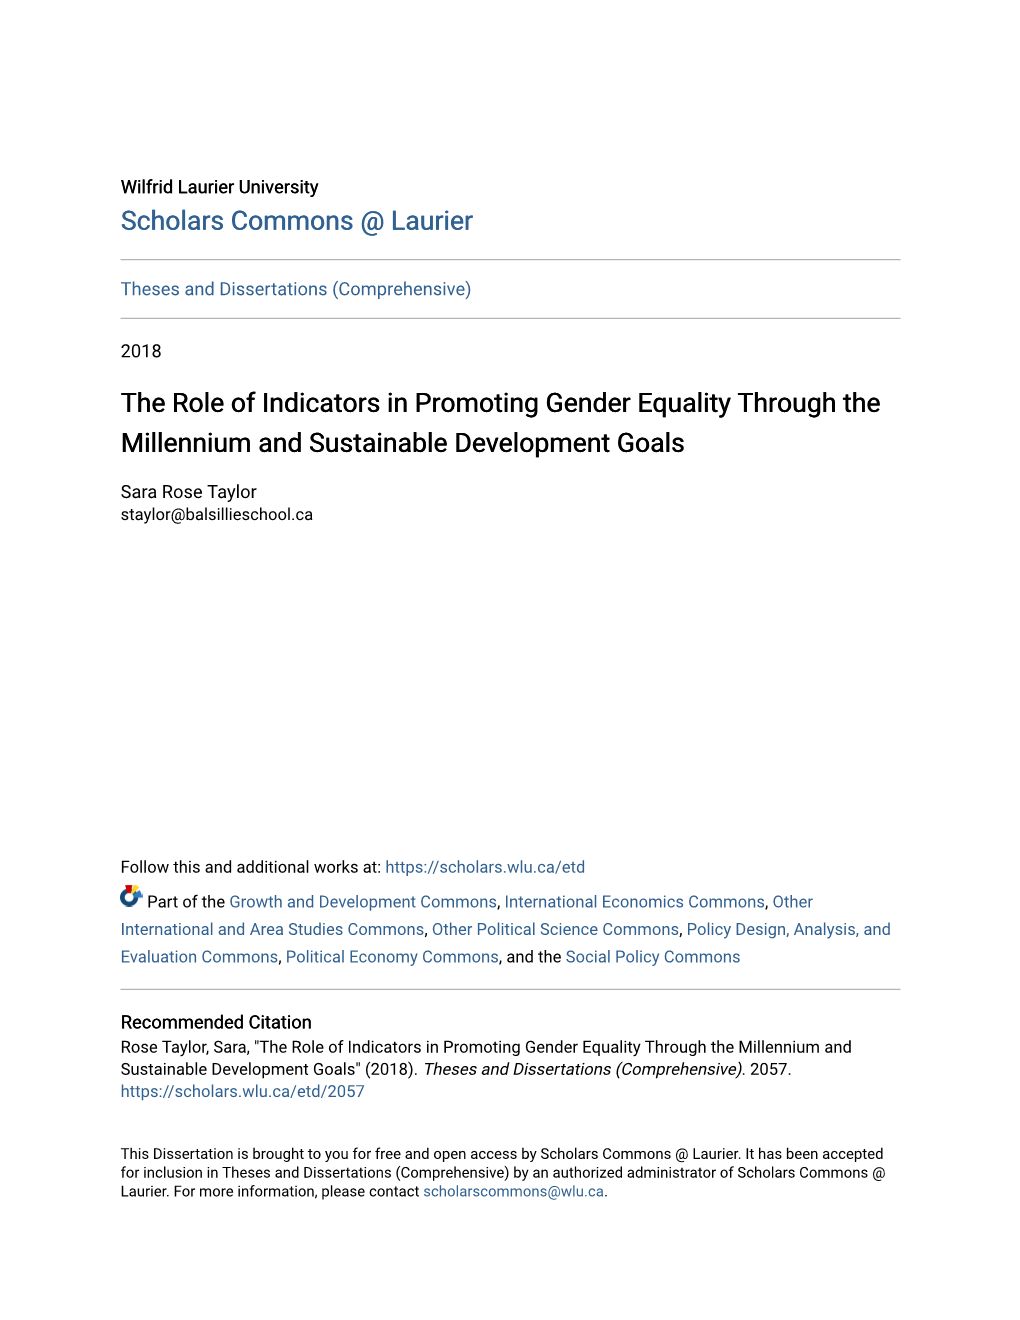 The Role of Indicators in Promoting Gender Equality Through the Millennium and Sustainable Development Goals